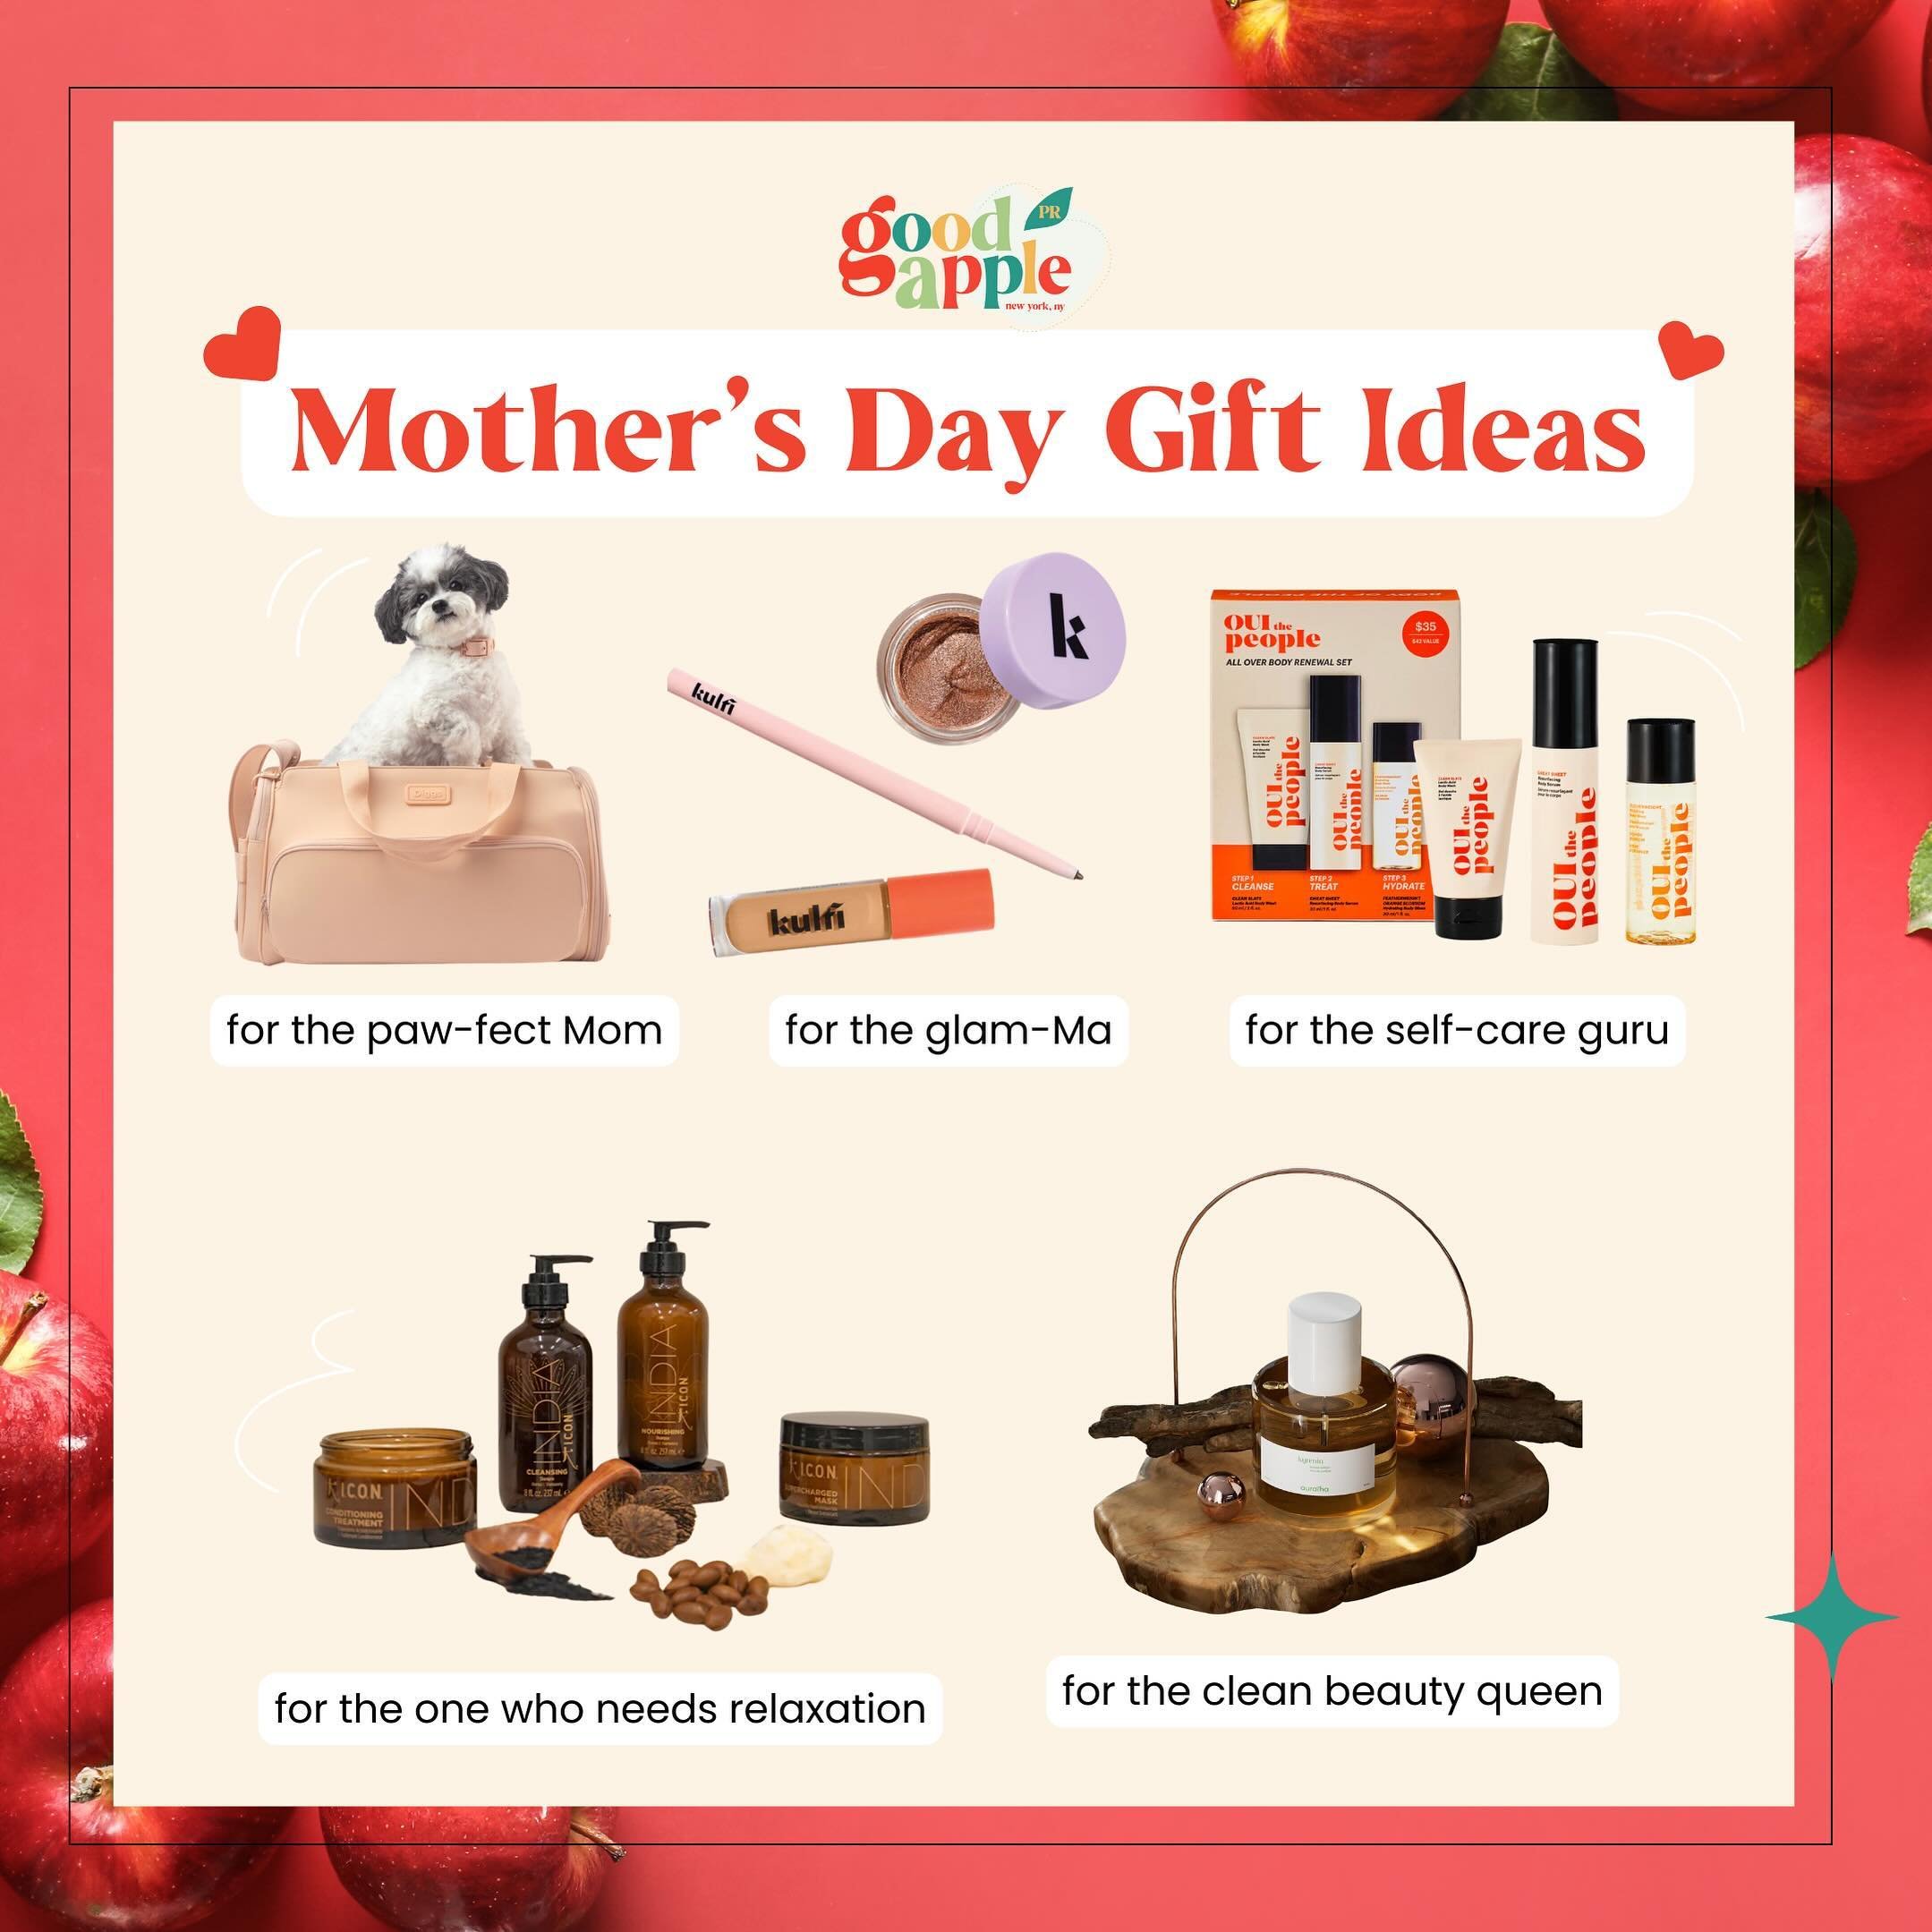 Ready for our GAPR team&rsquo;s favorite #mothersday gifts?! 💐🍎We love gift giving - what&rsquo;s your favorite gift to give the Mom in your life? Let us know in the comments 👇